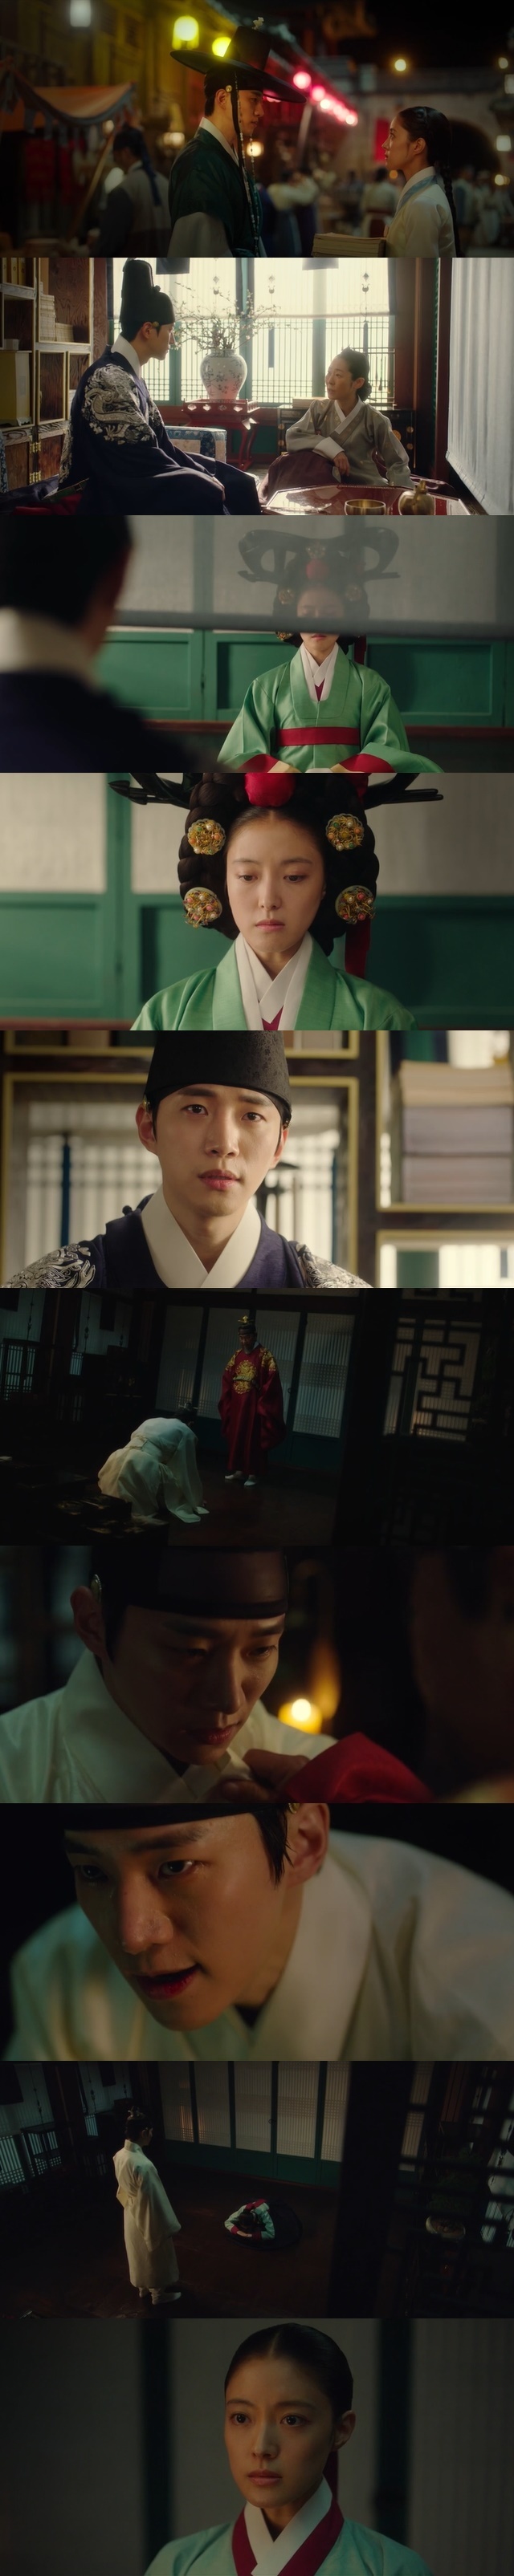 Lee Joon-ho has been horrified by his evil-supported performance of enduring violence and abuse to become a wage.In the 5th episode of MBCs gilt drama The Red Sleeve (playplayed by Jeong Hae-ri / directed by Jeong Ji-in and Song Yeon-hwa), which was broadcast on November 26, Lee Joon-ho, who is in Danger, and Sung Deok-im (Lee Se-young), who watches it closely, are seen in the mother sea of Hwawan Ongju (Seo Hyo-rim) It was drawn.On this day, he forgave Sungdeok, who followed him to the Dongduk society meeting site under the name of Acid silver Lee Hye-bin Hong (Kang Mal-geum).In addition, he introduced the acid silver Sungdeok to the Dongduk members and introduced him as Goodbye My Princess Nine, which he deliberately called for his remorse.Sung Duk Lim became the first one of the Dongduk society with the body of GLOW.Iacid silver, I went to the bookstore together and bought a lot of books to Sung Duk-im. Read a book once a month and write a sentence you do not know.I will teach you the will. Sung Deok-im regarded it as a kind of reflection, but it was a kind of affection expression of discrete.After that, I went into the acid silver palace and thought of it as a virtue, and I carefully hoped that Seongdeokim would think of himself while reading the book.The overflowing minds of the separated people were noticed by Sung Duk-im, Hong Duk-ro (Kang Hoon-hoon), and even Lee Hye-bin Hong.Lee Hye-bin Hong, who hopes to somehow sit in the San E safely, has finally made time for the thought poems that have finished the ceremony to raise the ceremony and to greet Seson.Lee Hye-bin Hong deliberately made him a virtue in the turn of other thought poetry greetings, and talked in front of him about the issue of discrete, Bowie, Maybe she, and concubine.The device does not intend to put Maybe she, the GLOW of a humble identity, by her side, said Iaid silver Lee Hye-bin Hong, who does not know that Sungdeok is sitting in front of her.Only the ladies of the prestigious masters deserve to be near the device; only such GLOW can produce an orthodox successor and it is the duty of the device to have such a successor. It was late when I found that I was acid silver foot and that I was a virtue that seemed to be hurt by my words.Since then, Iacid silver has been put back in Danger.When Lee Deok-hwa told the agency cleanup of the separated city, the heart-wrenching Seo Hyo-rim was in trouble with entering the San E regularly outside the palace this time.The slander of these San E monarchs floundering in and out of the air was a dark year: Iacid silver, who could not speak of Dongdukhoe, could not make any excuses and was put in gold.The attack on Hua Wanongju continued to drive.Hwawan Ongju and her son, Jung Baek-ik (Kwon Hyun-bin), showed Yeongjo the record of the escorting axurers of Seson going out of the palace when they became the first day of each month.In the middle of the night, Yeongjo found Goodbye My Princess, and hit all the inside and Nine with a hard blow on the cheek of the dissociation.Yeongjo said, You flew in and out like a rumor. No. No. Not like your father.Youre not a man like your father who curses his old kings to die and die. You can fix it, Sana.You can fix it, he said, and hit the cheek of the dissociation several times, and immediately went back to the cold, leaving the name Never let anyone in. It was the only thing that comforted the disastrously left dissociation that witnessed this scene on this day. Seongdeokim said to the dissenter outside the door, Is it okay?I do not have anything to do with it, he said, holding back the acid silver crying and saying, Just stay with me. Thats all.Sung Duk-im realized that Yeongjos assault was not one or two occasions in the reaction of such a discrete, and Sung Duk-im dared to ask, I have to endure it.Then Iacid silver sobs and says, Theres something I want to do, Im patient, Im enduring to get One. I know what pain is.I know how many people suffer. I am the crown prince of this country. I have strength. It can help many.You know how much I want to do. You just stay with me. Thats enough. Sung Duk-im later broke the royal name and opened the door and knelt in front of the mountain.I was worried about the acid silver virtue and tried to say, Get back. However, Sung Duk-im said, I dared to break the name because I had something I wanted to say to you.Rest assured, you must achieve your dreams in the fall.